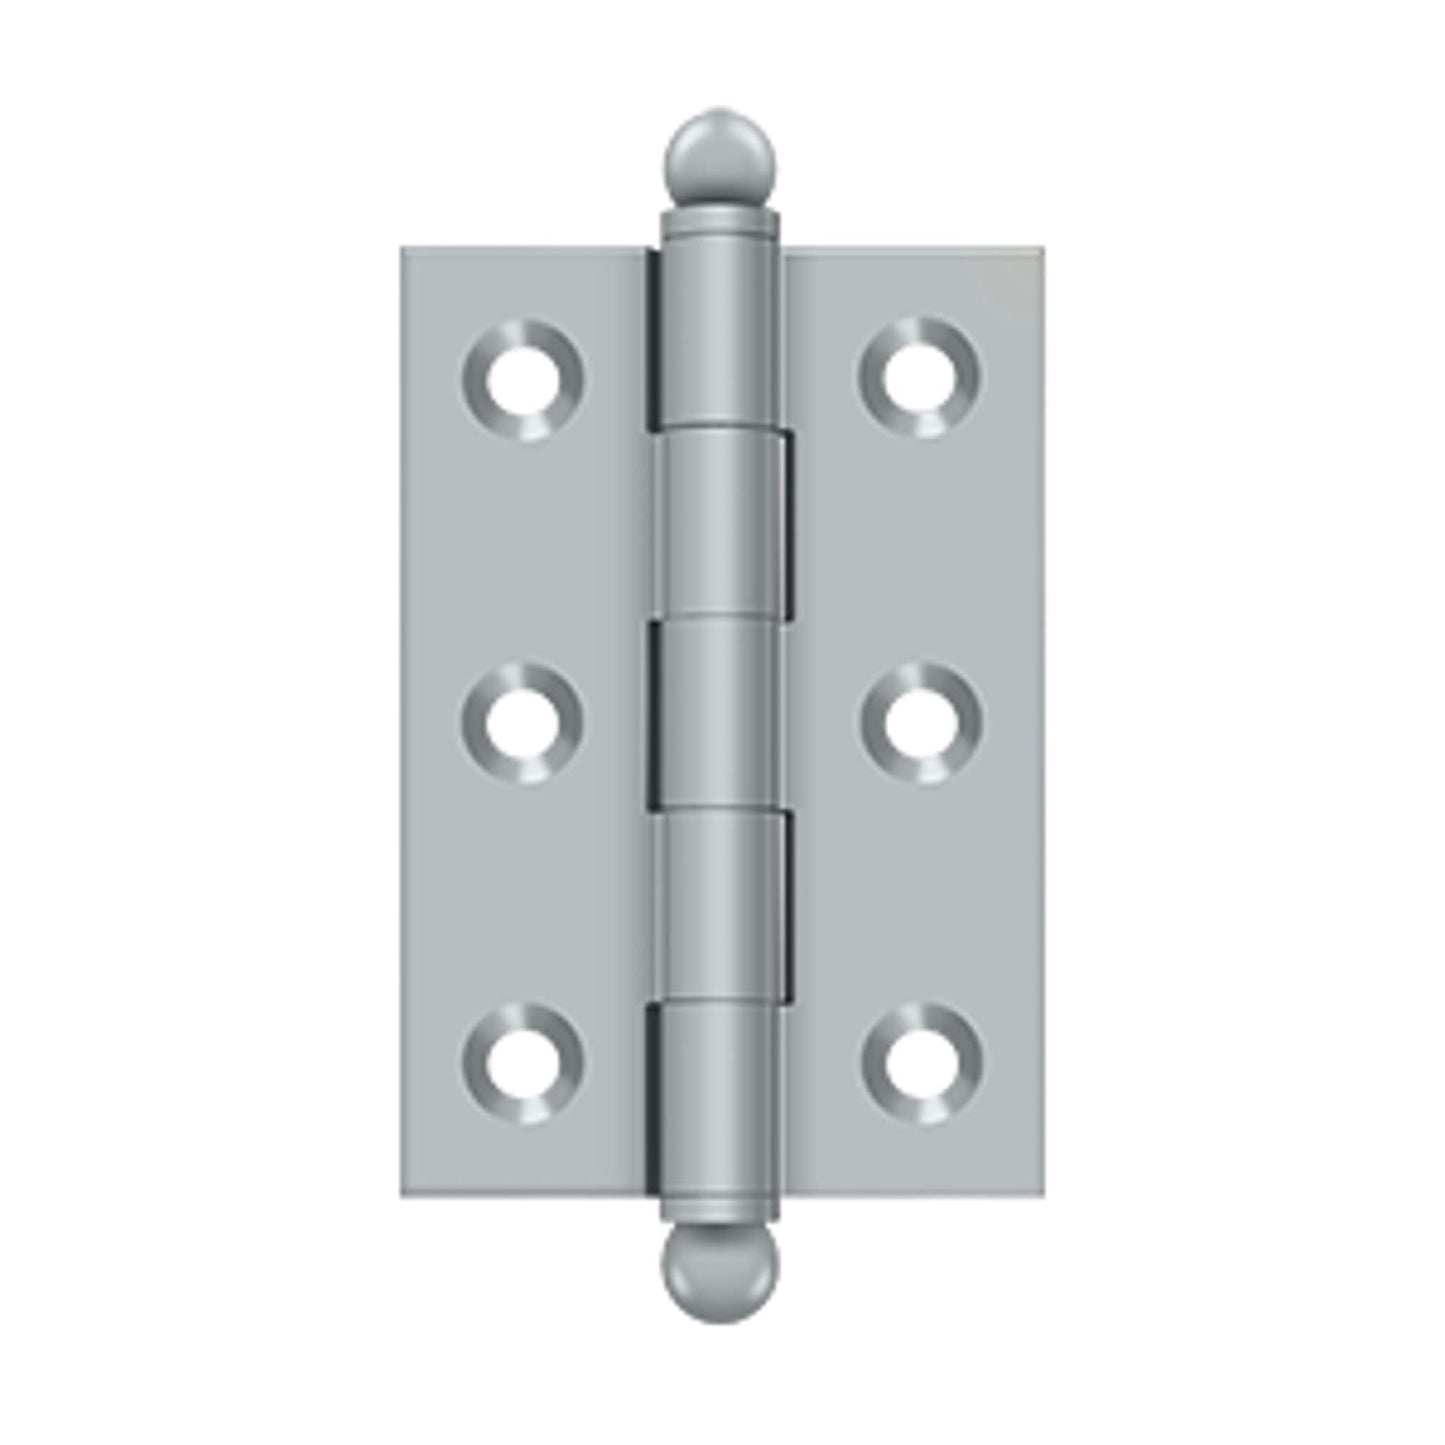 Deltana - 2-1/2" x 1-11/16" Hinge, w/ Ball Tips, Specialty Solid Brass